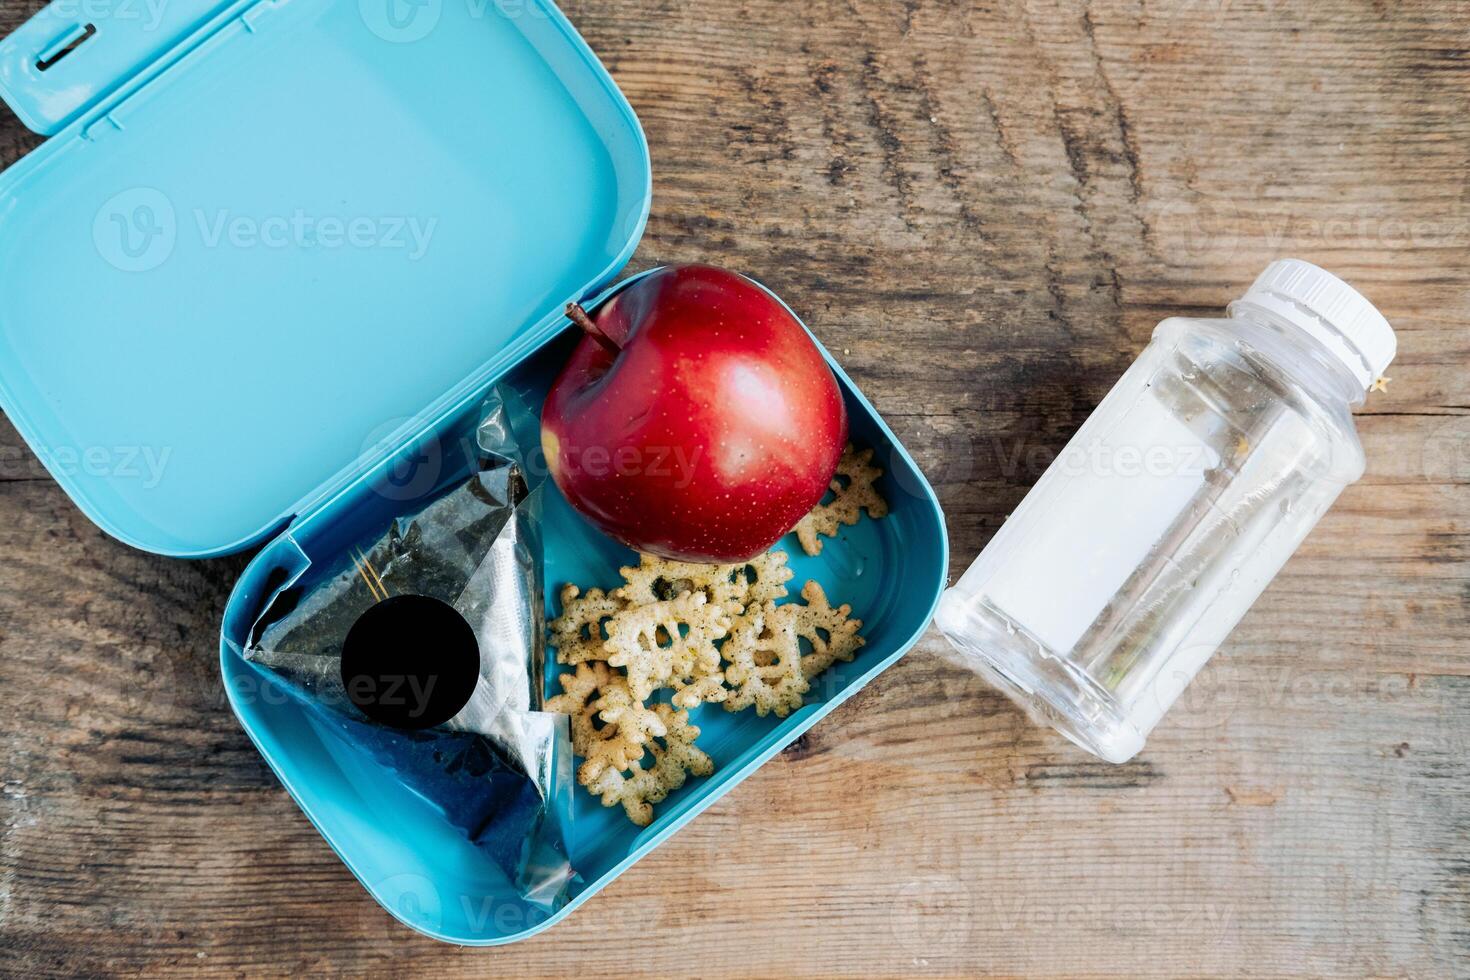 Asian student's lunchbox of onigiri,chips and apple with bottle of water,On wooden background photo